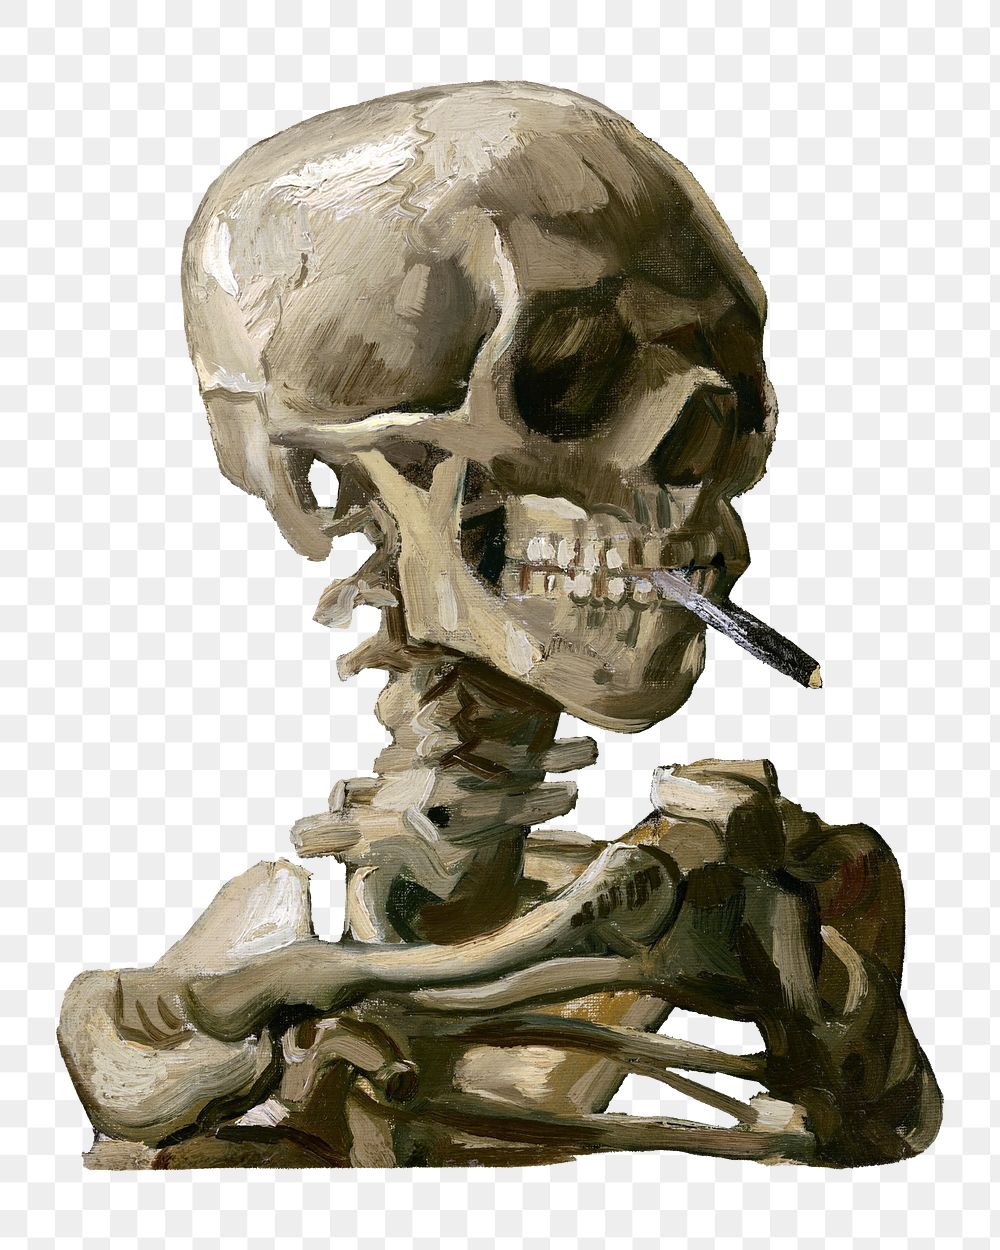 Aesthetic Vincent van Gogh's smoking skull png on transparent background.  Remastered by rawpixel